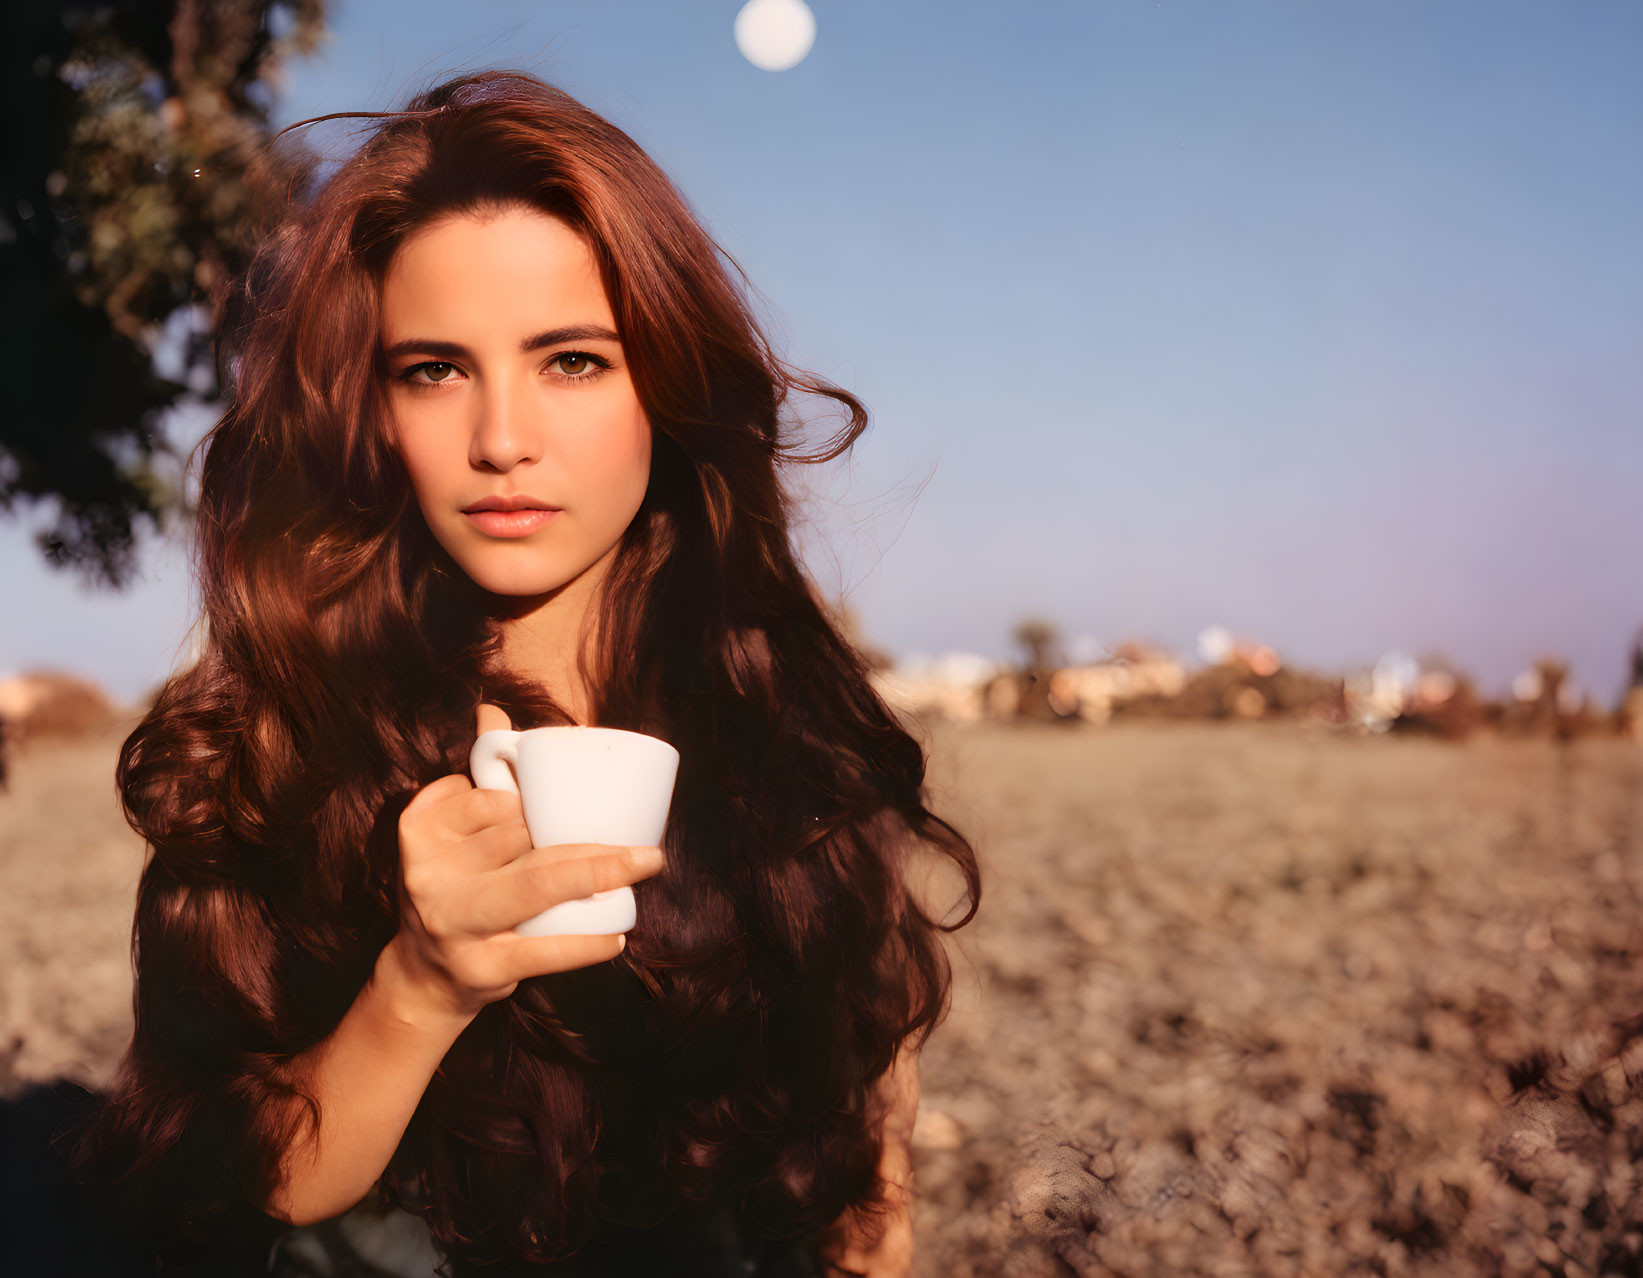 Woman with Long Brown Hair Holding White Cup Outdoors at Twilight